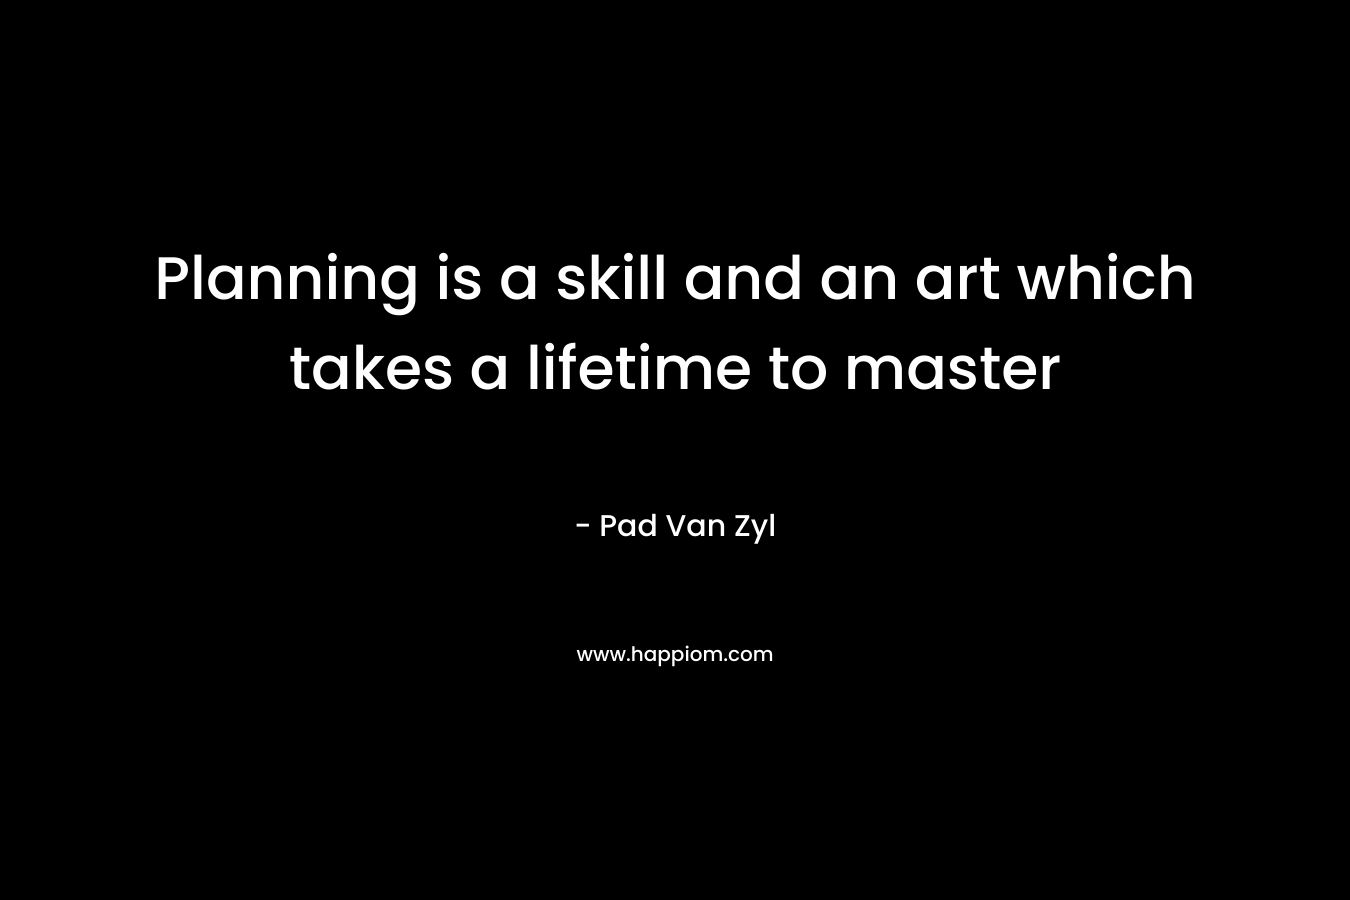 Planning is a skill and an art which takes a lifetime to master